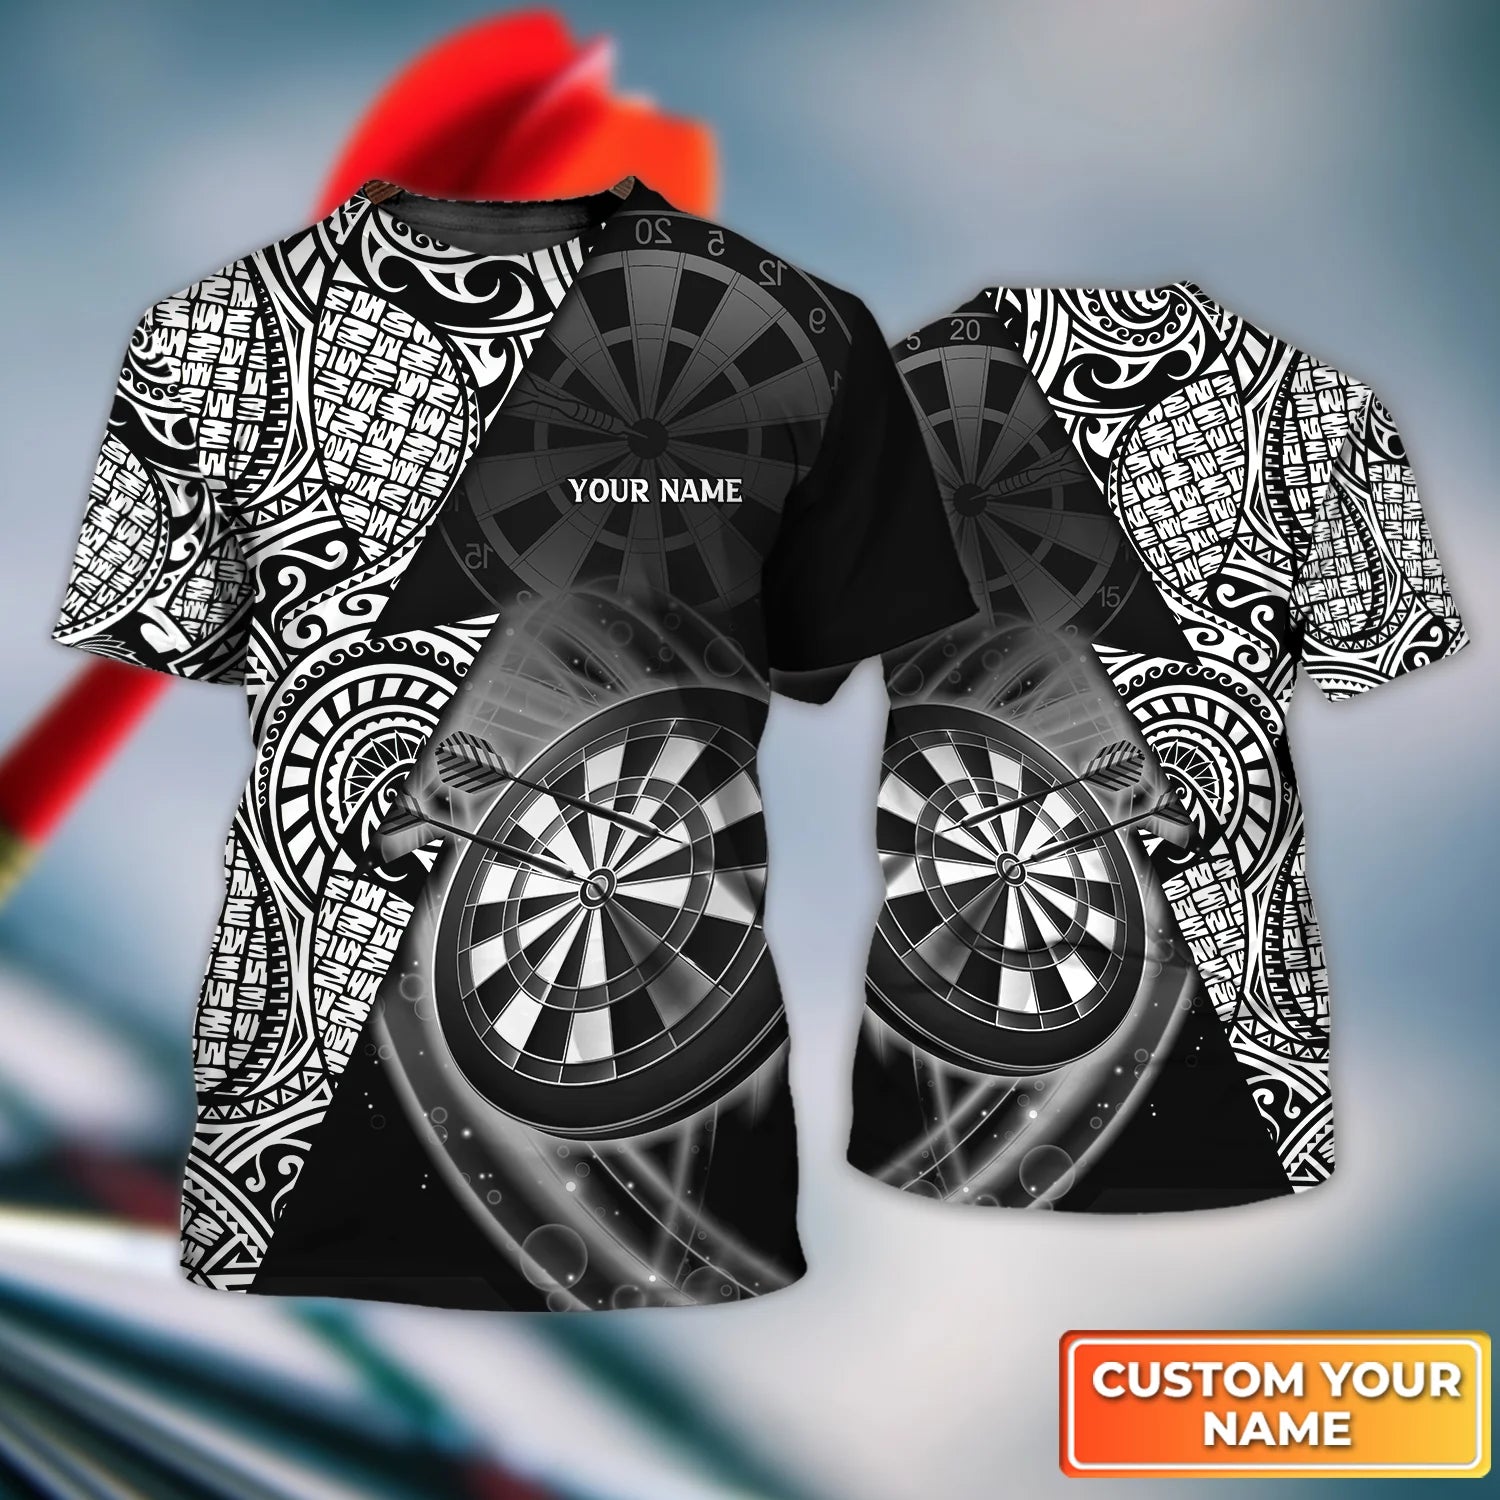 Flame Darts King Personalized Name 3D Tshirt For Darts Team Player – DT067